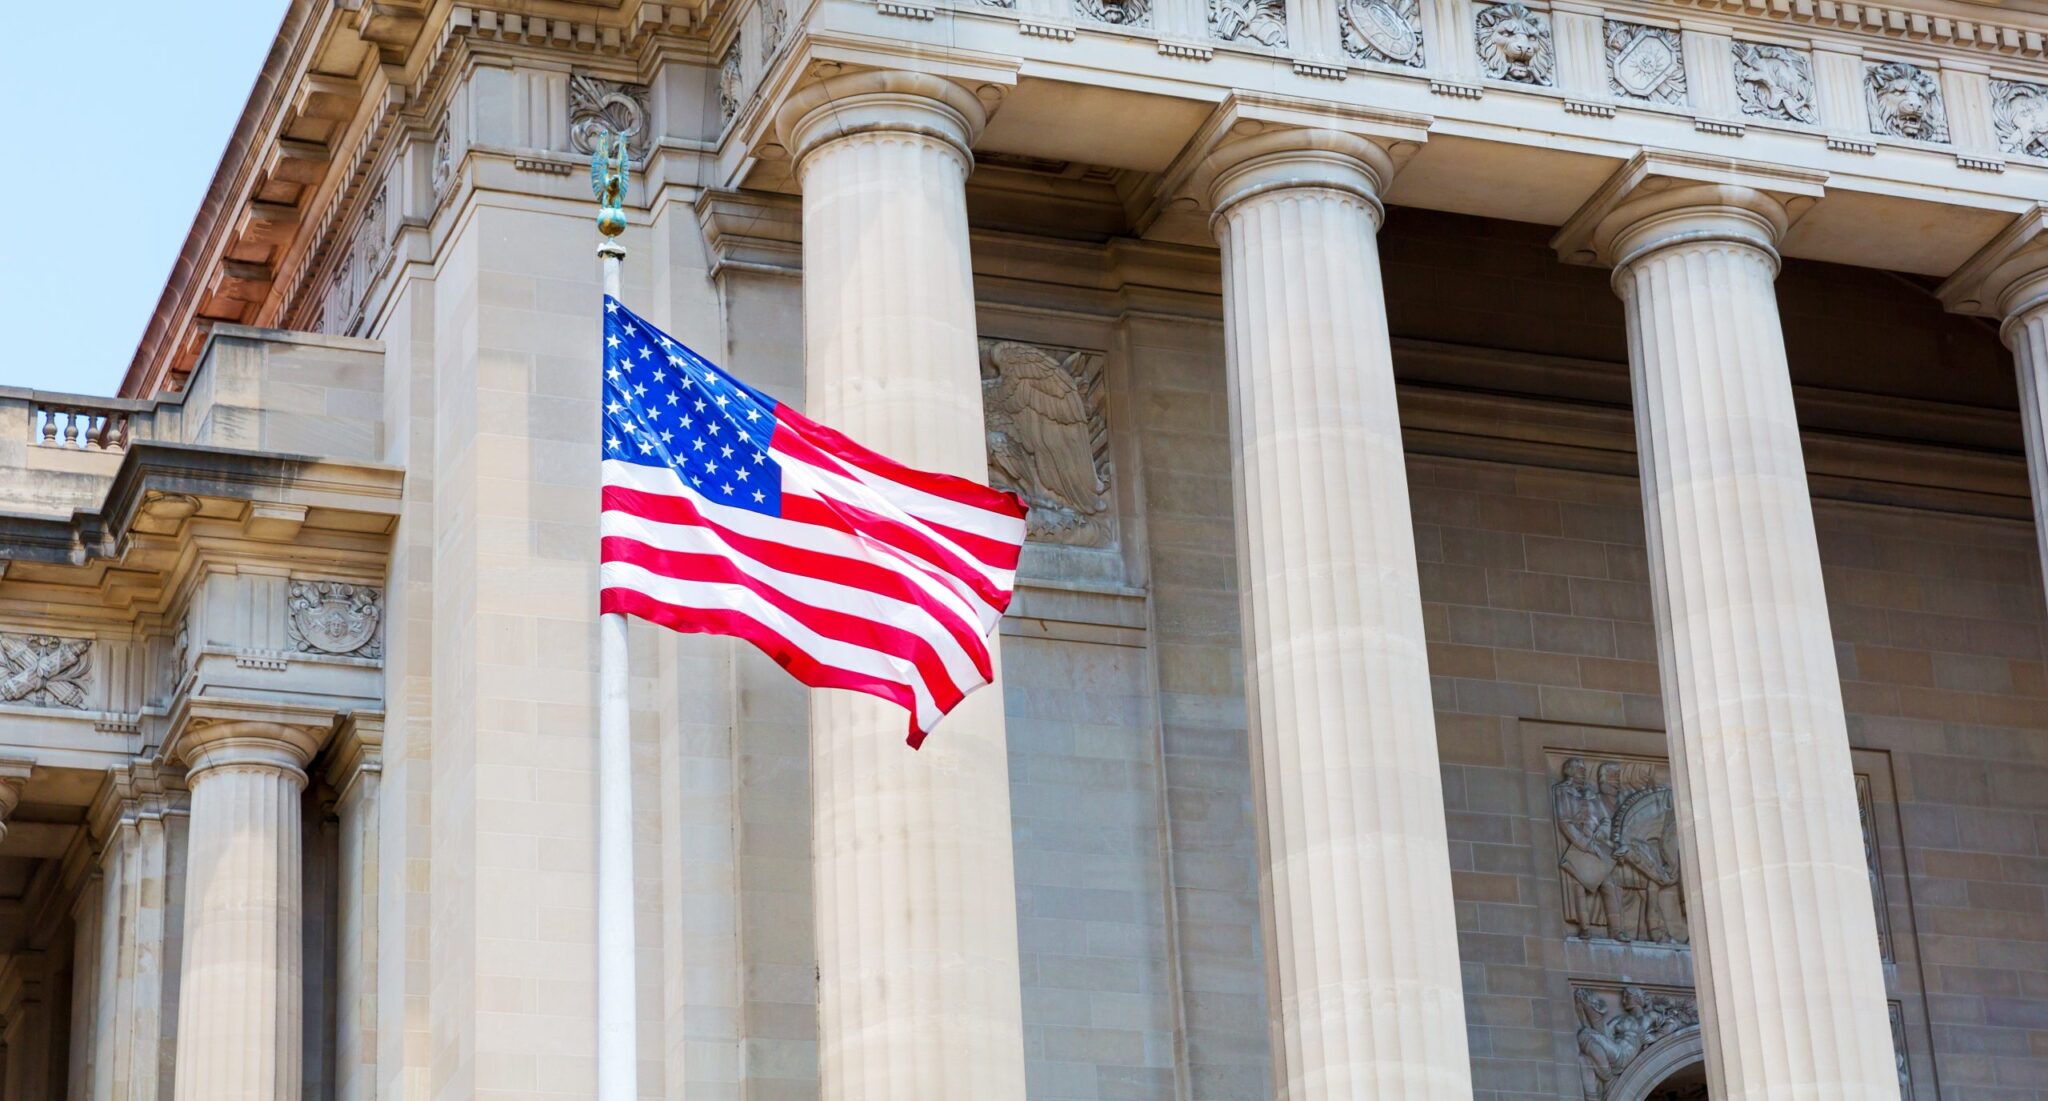 American flag waving in front of a historic building with tall columns.